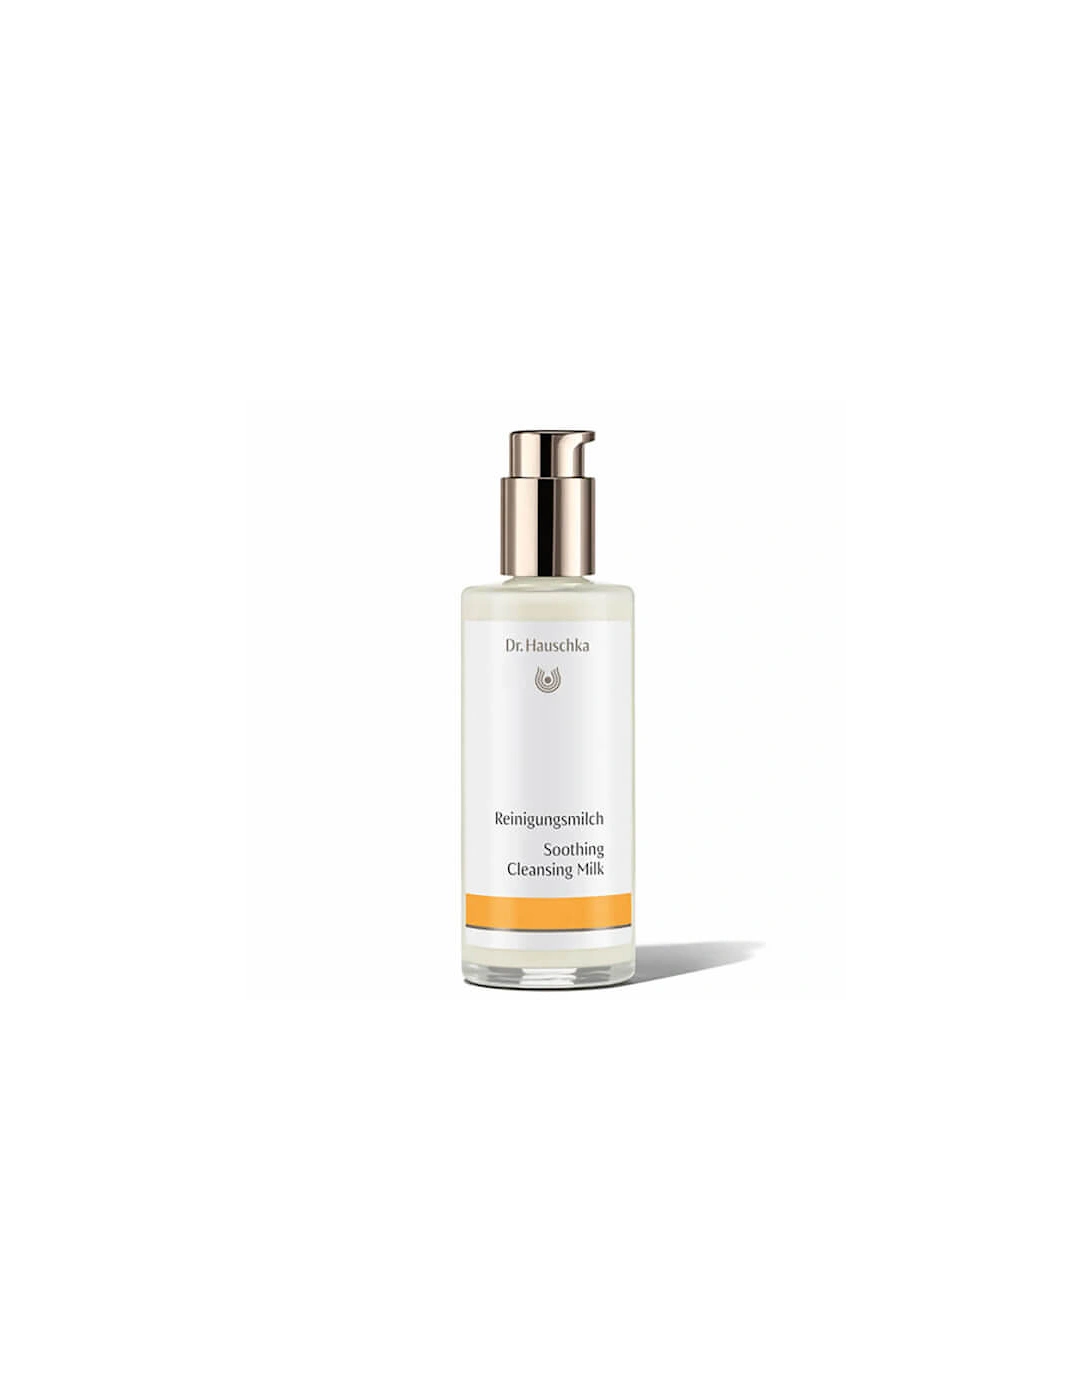 Soothing Cleansing Milk 145ml - Dr. Hauschka, 2 of 1